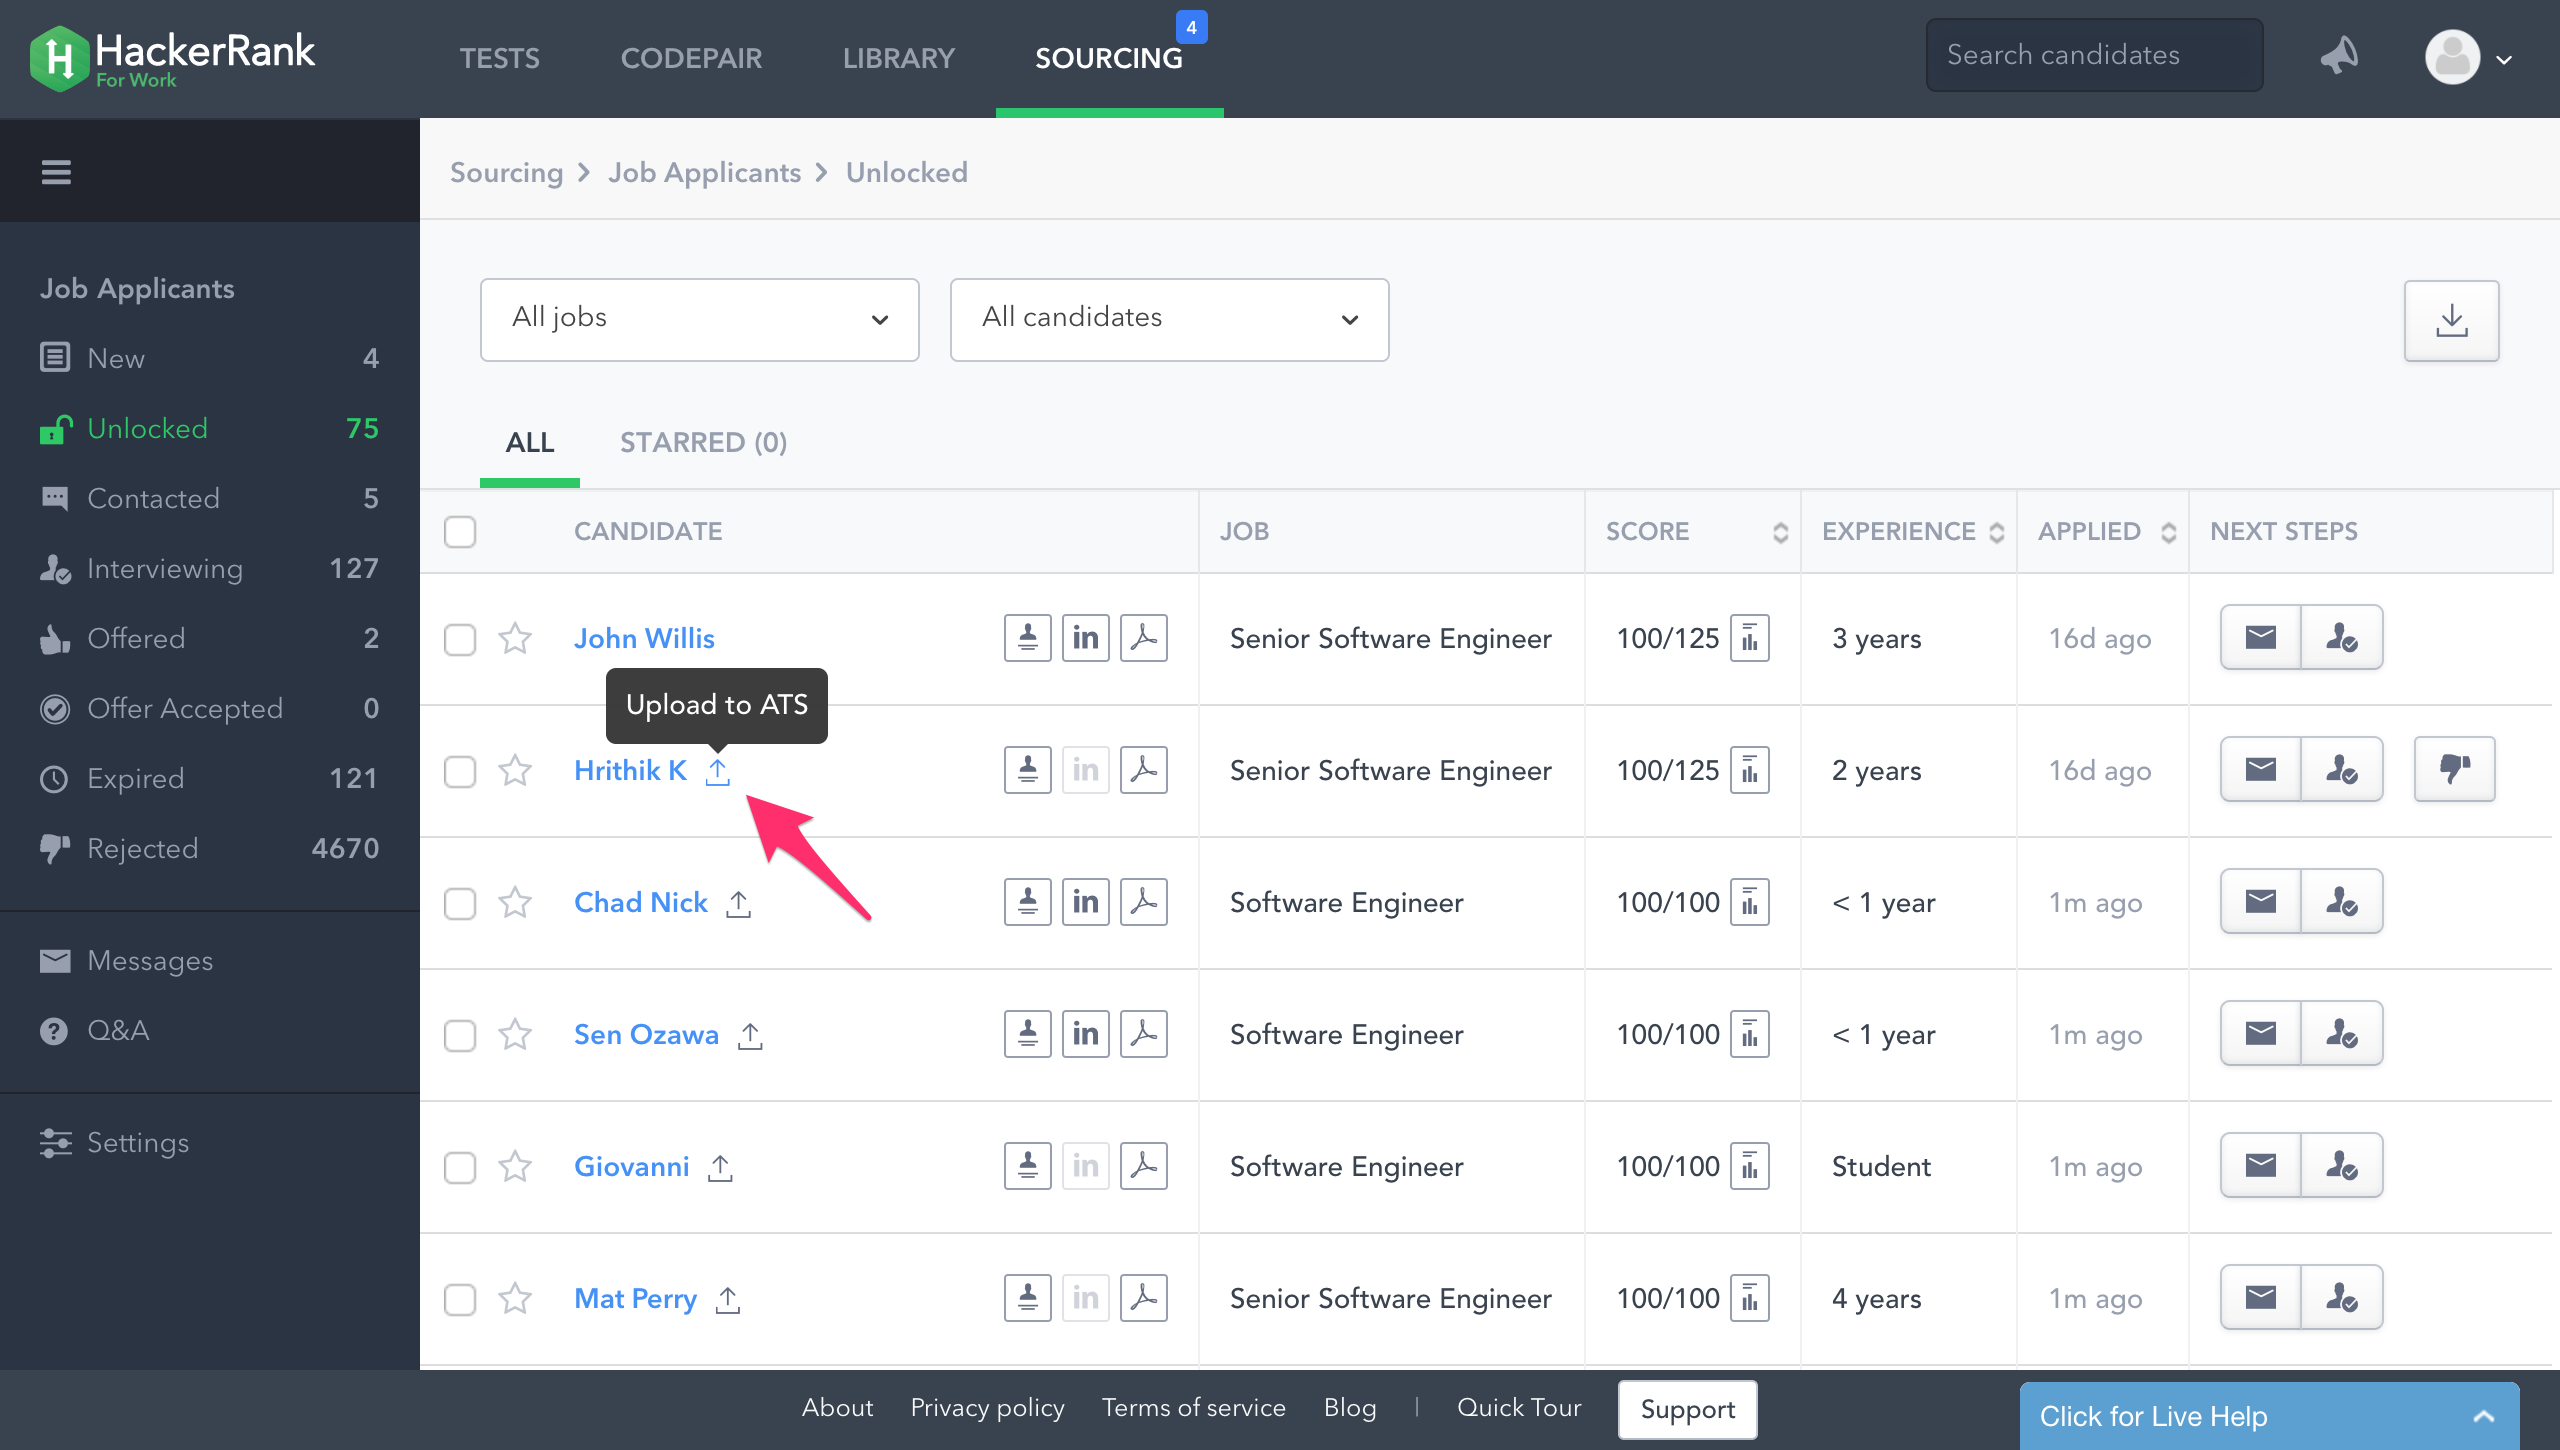 Hackerrank settings sourcing tab with arrow pointing to candidate name in list